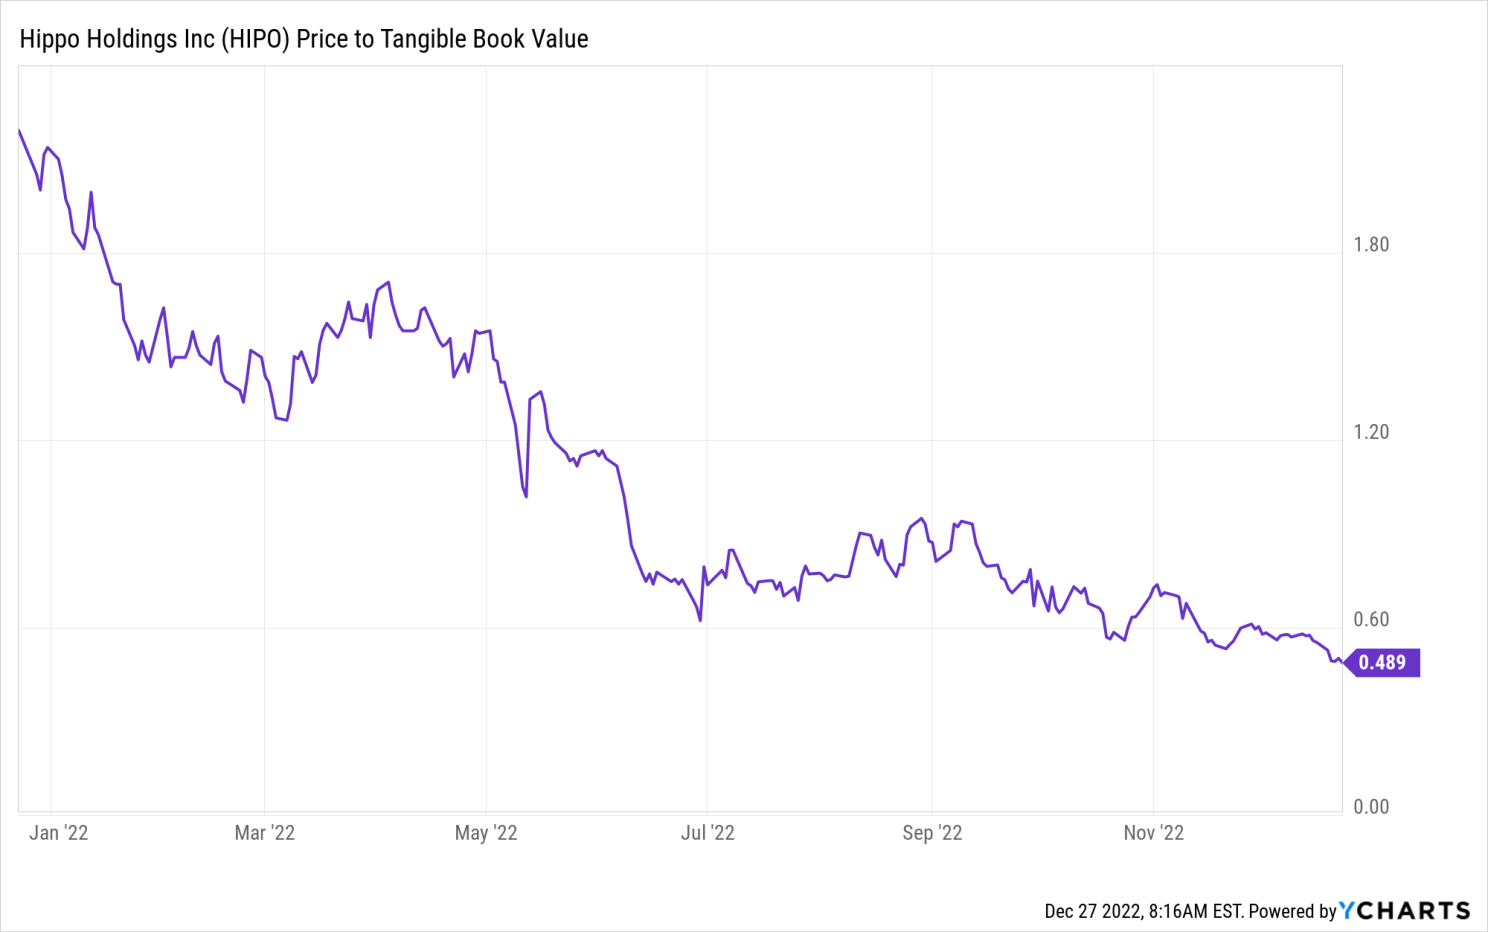 HIPO Price to Tangible Book Value